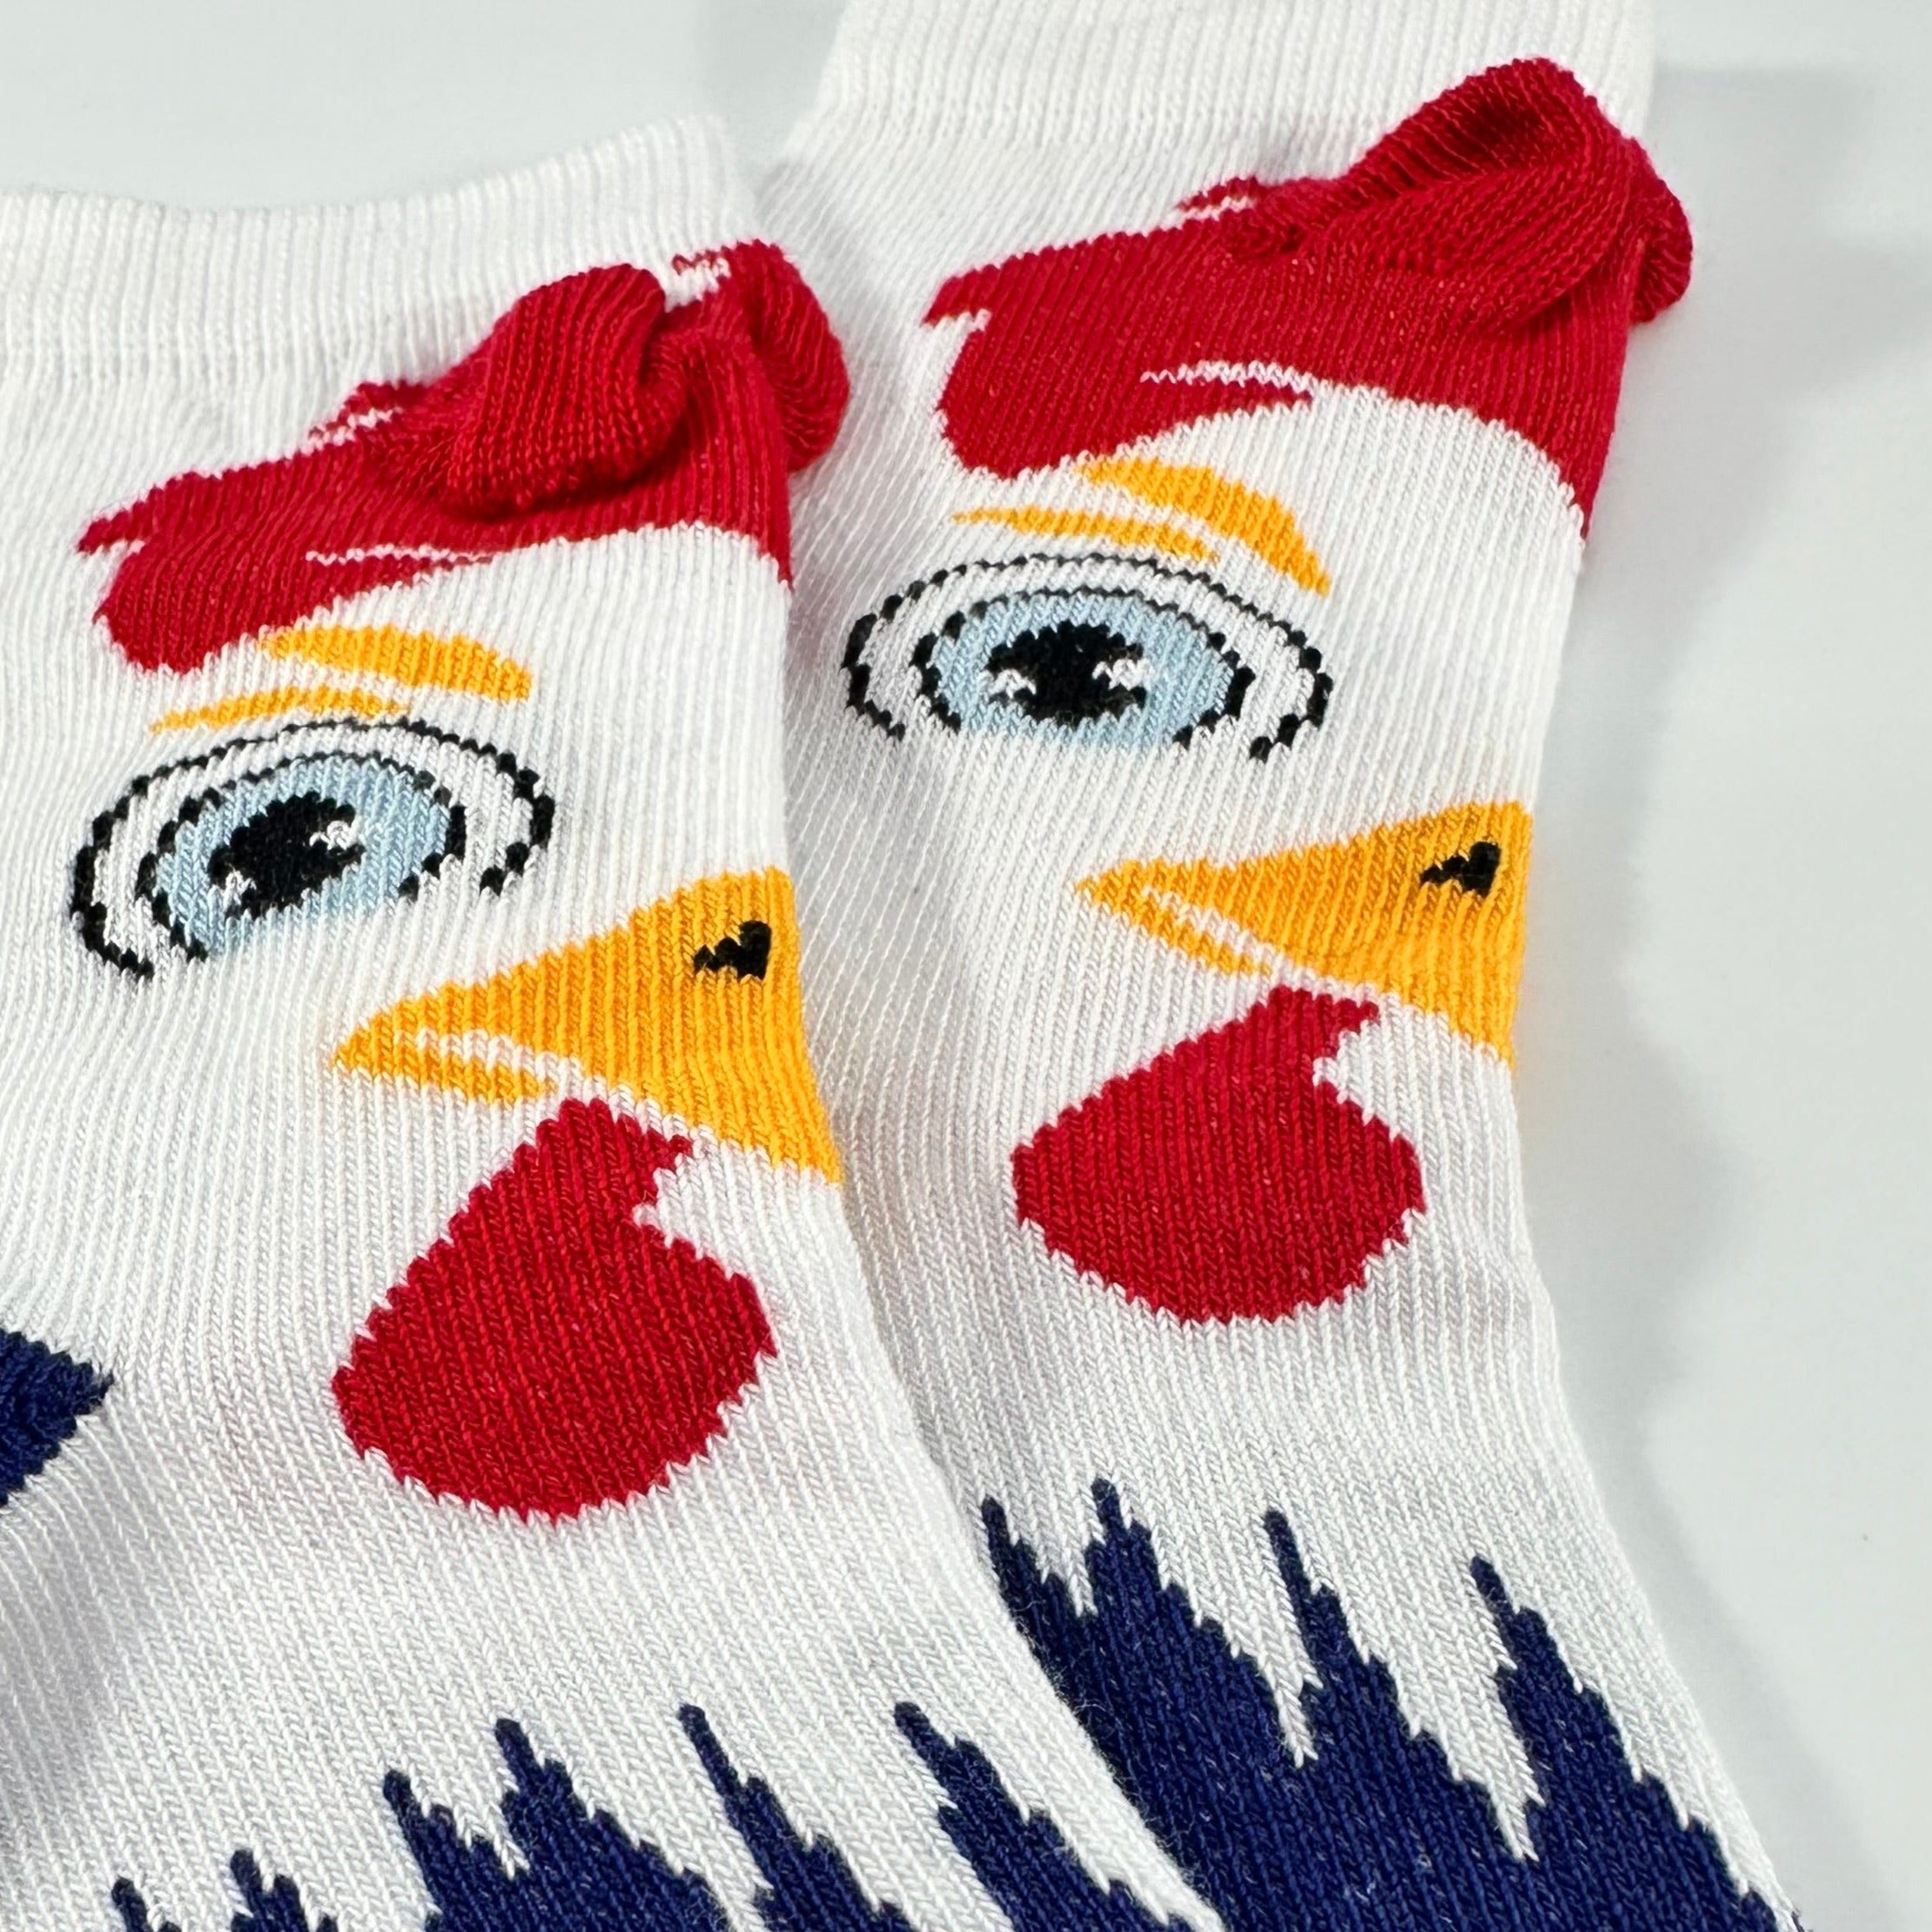 Rooster Socks from the Sock Panda (Age 3-7)